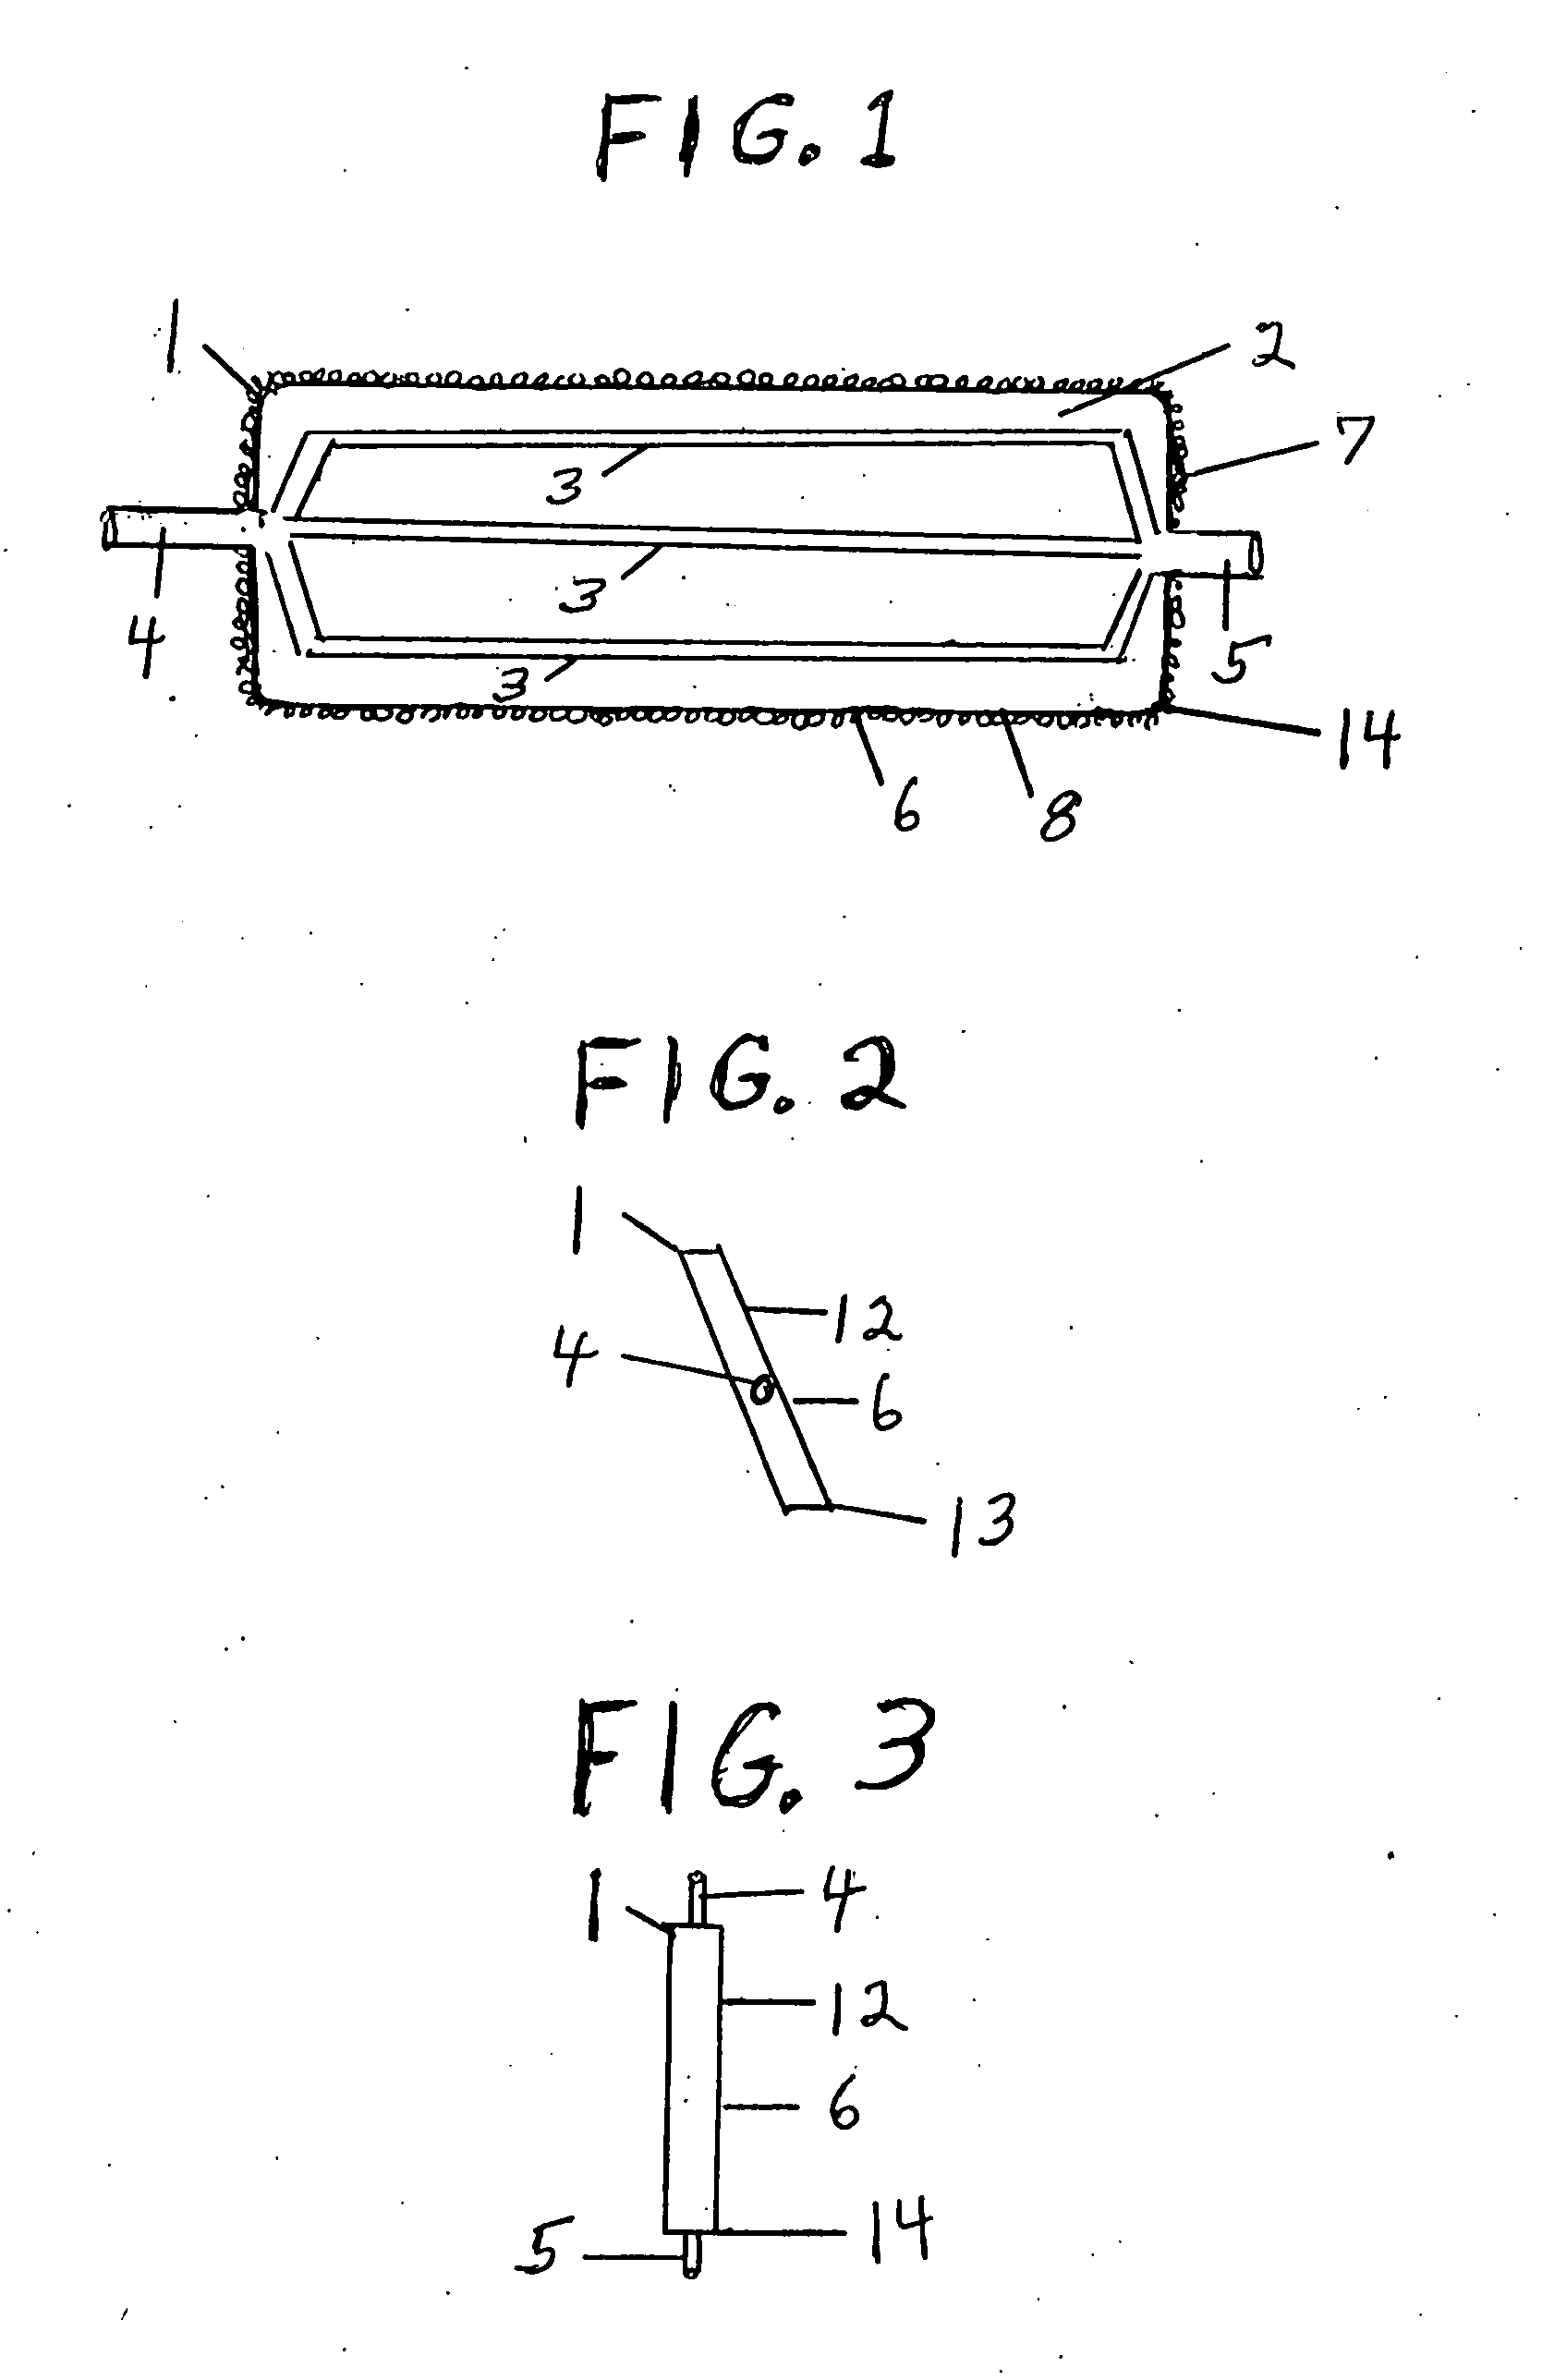 Capillary tube/plate refrigerant/air heat exchanger for use in conjunction with a method and apparatus for inhibiting ice accumulation in HVAC systems